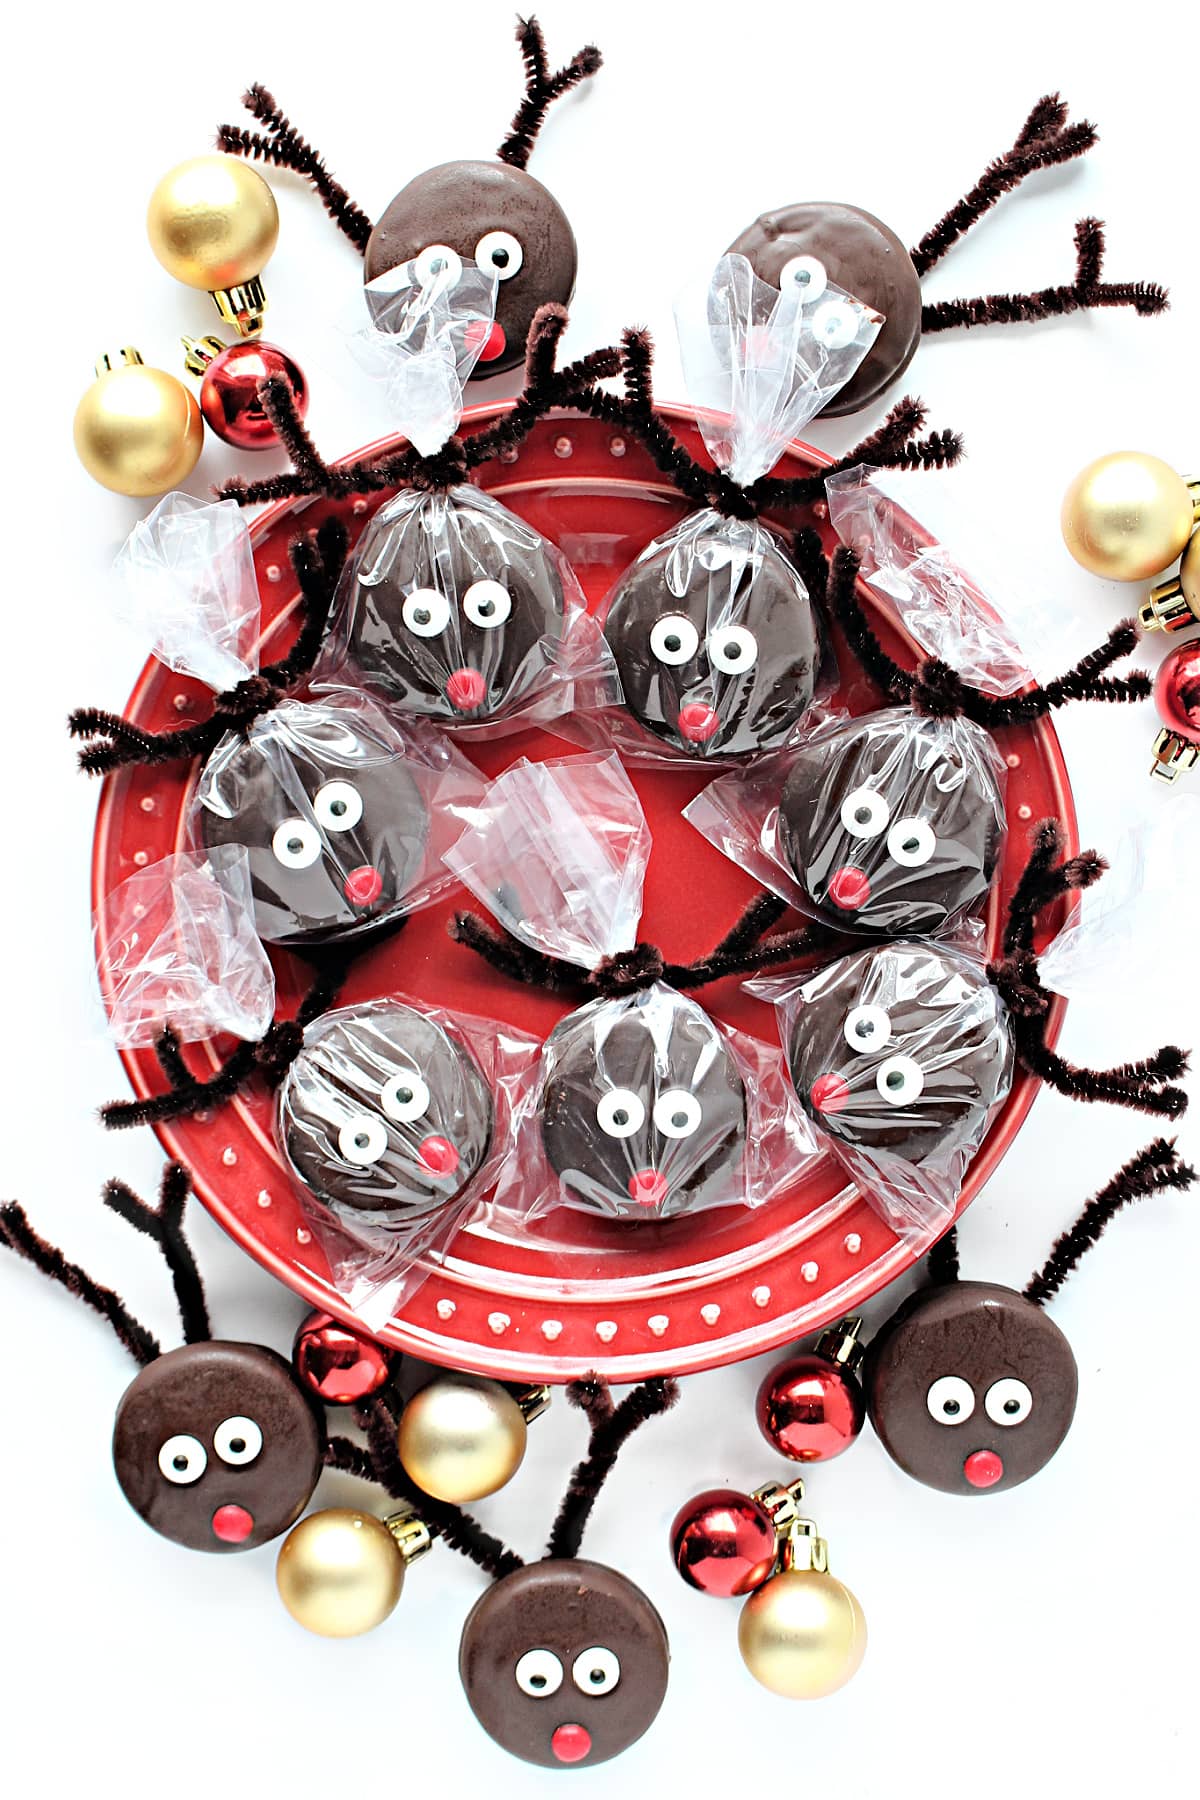 Chocolate dipped Oreos with candy eyes and a red candy nose to look like Rudolph.